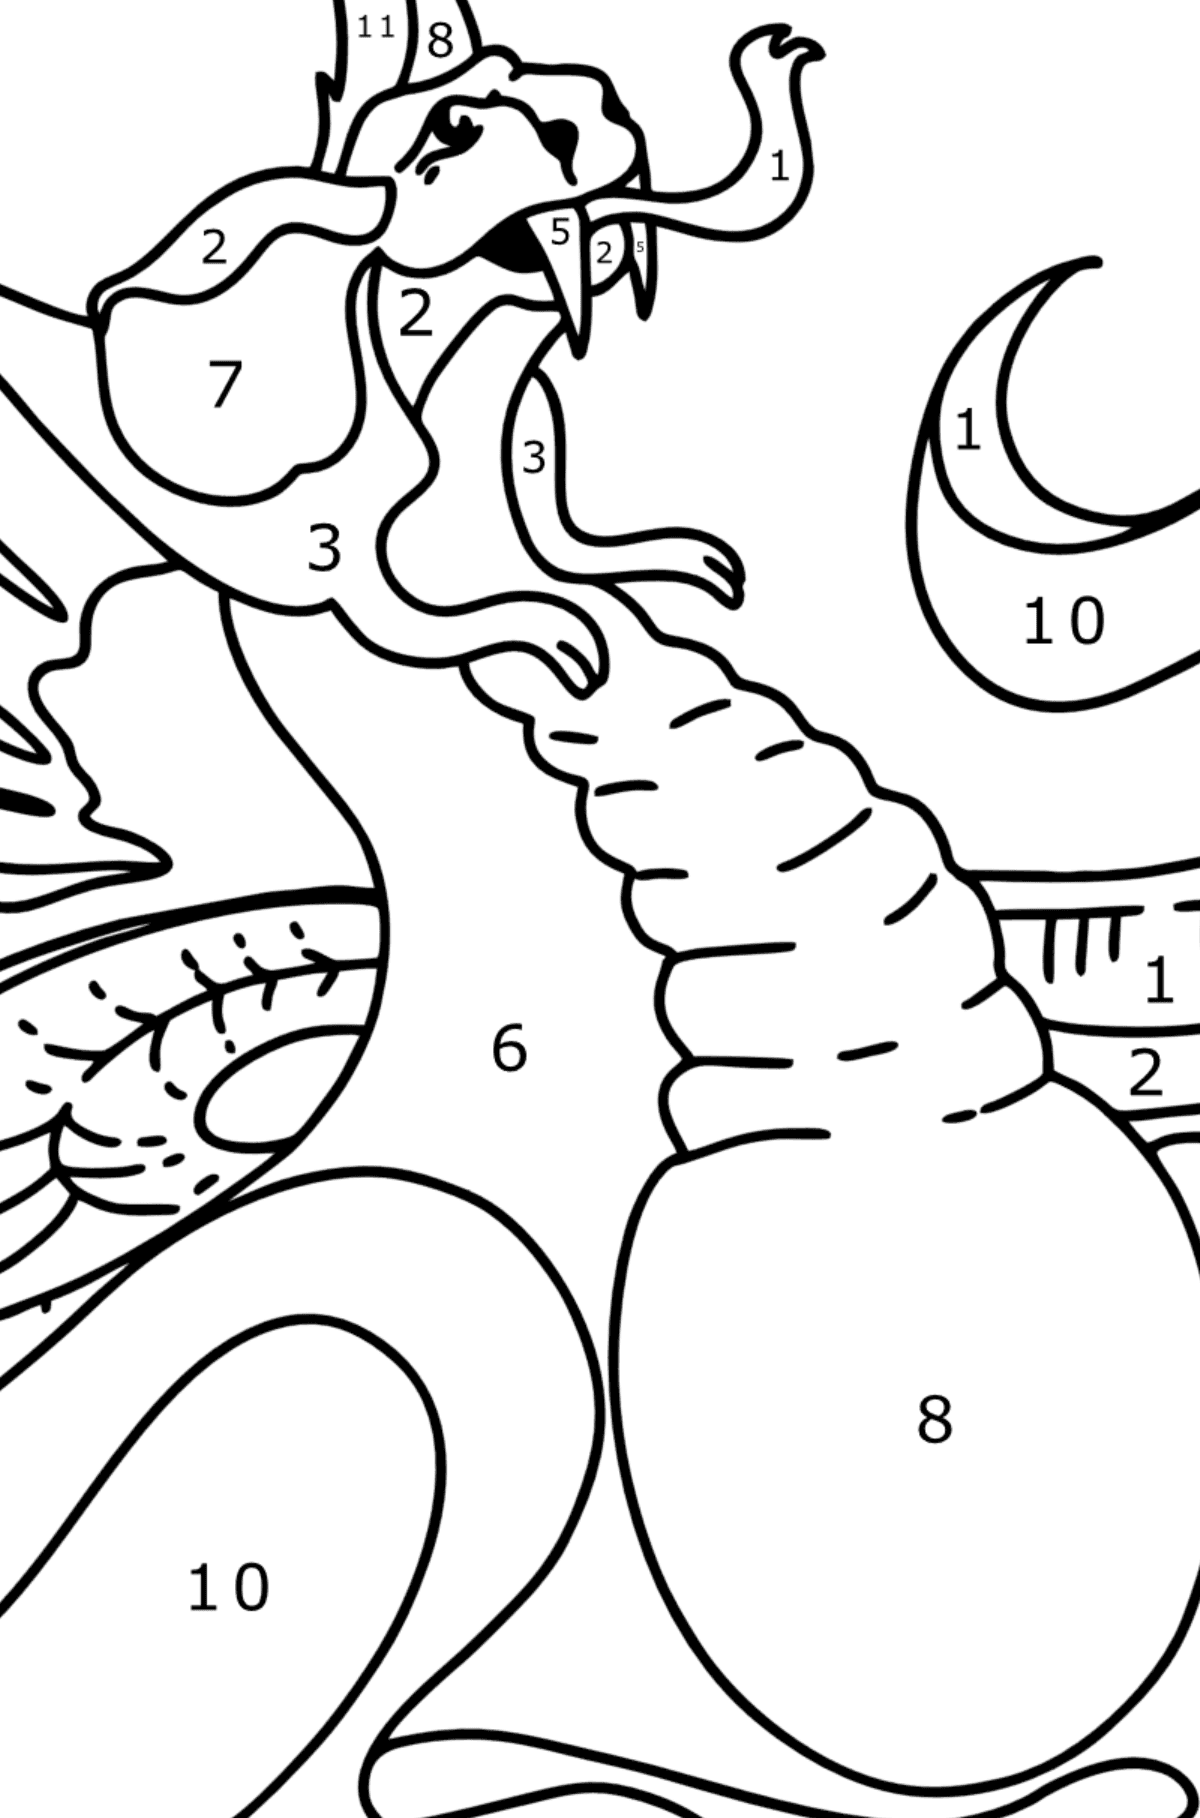 Tired Dragon coloring page - Coloring by Numbers for Kids